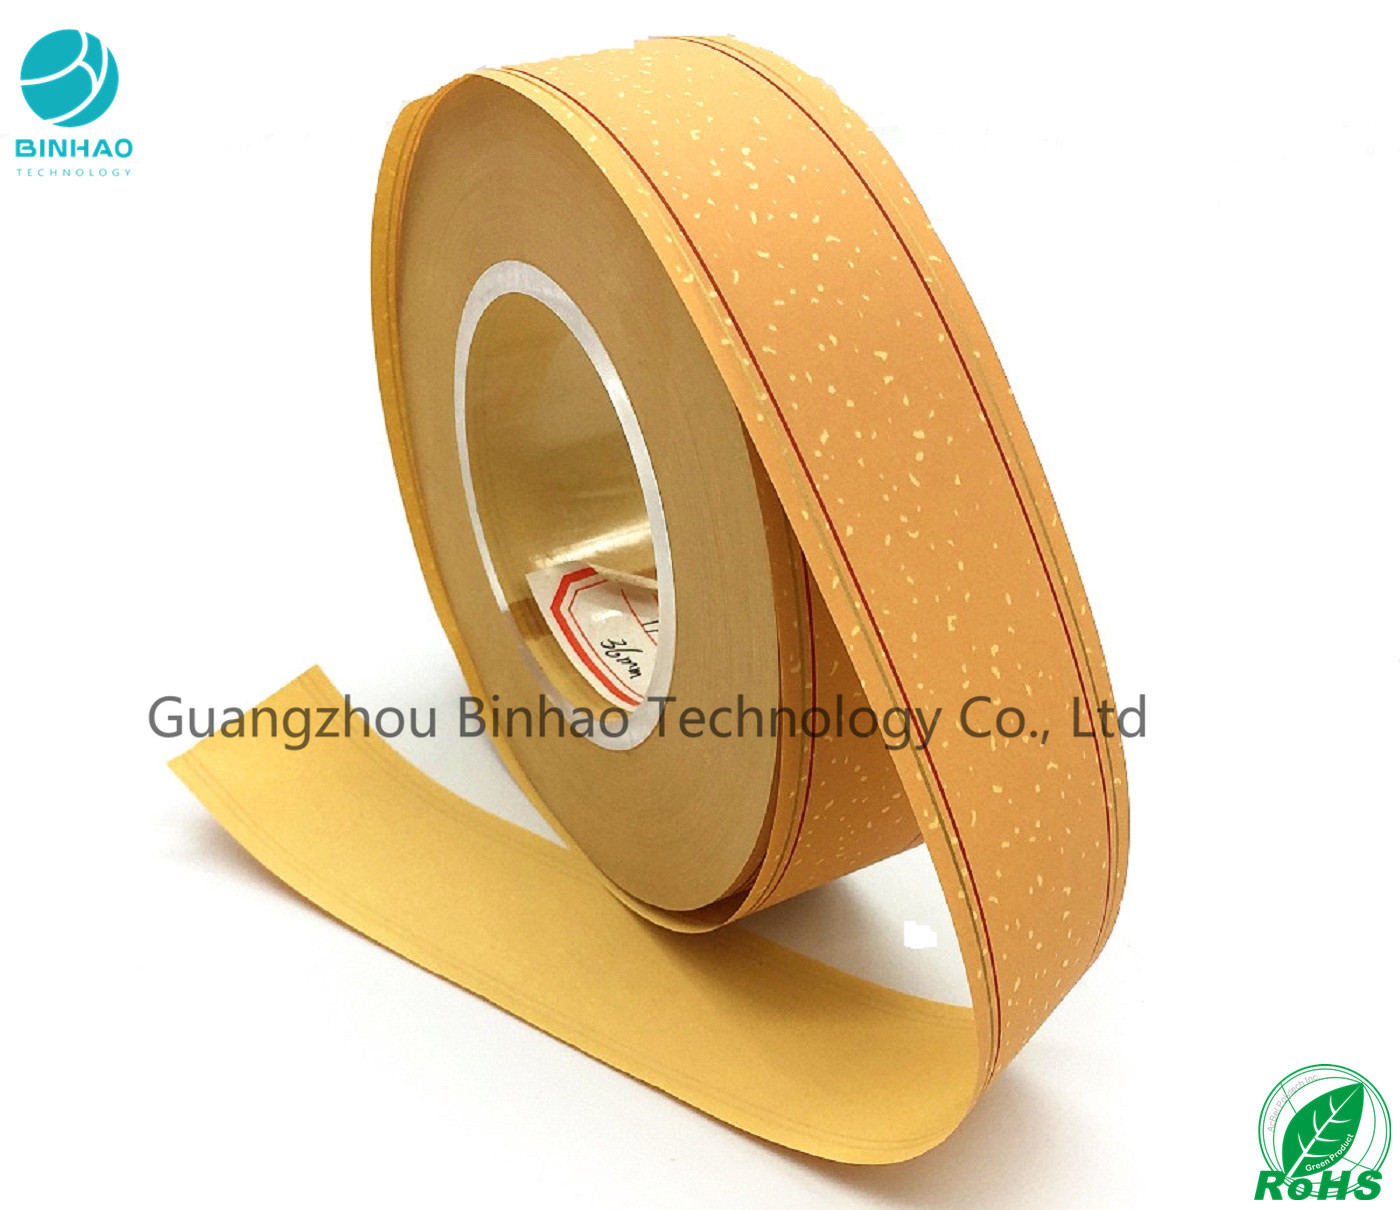 Natural Permeability High Light Cork Tipping Paper With Good Quality In 34g